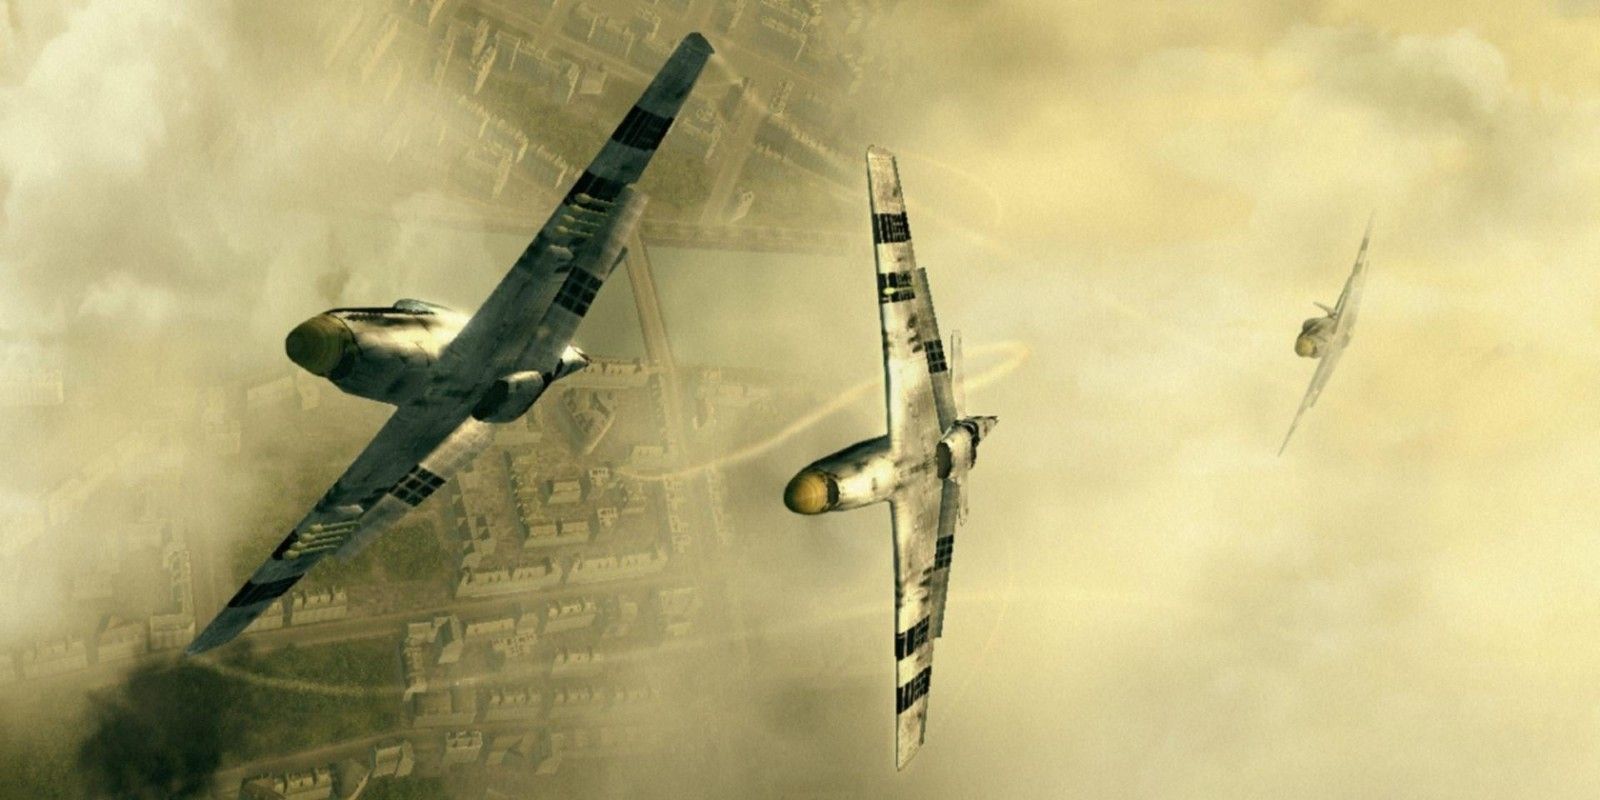 A dogfight depicted in Blazing Angels: Squadrons of WWII.